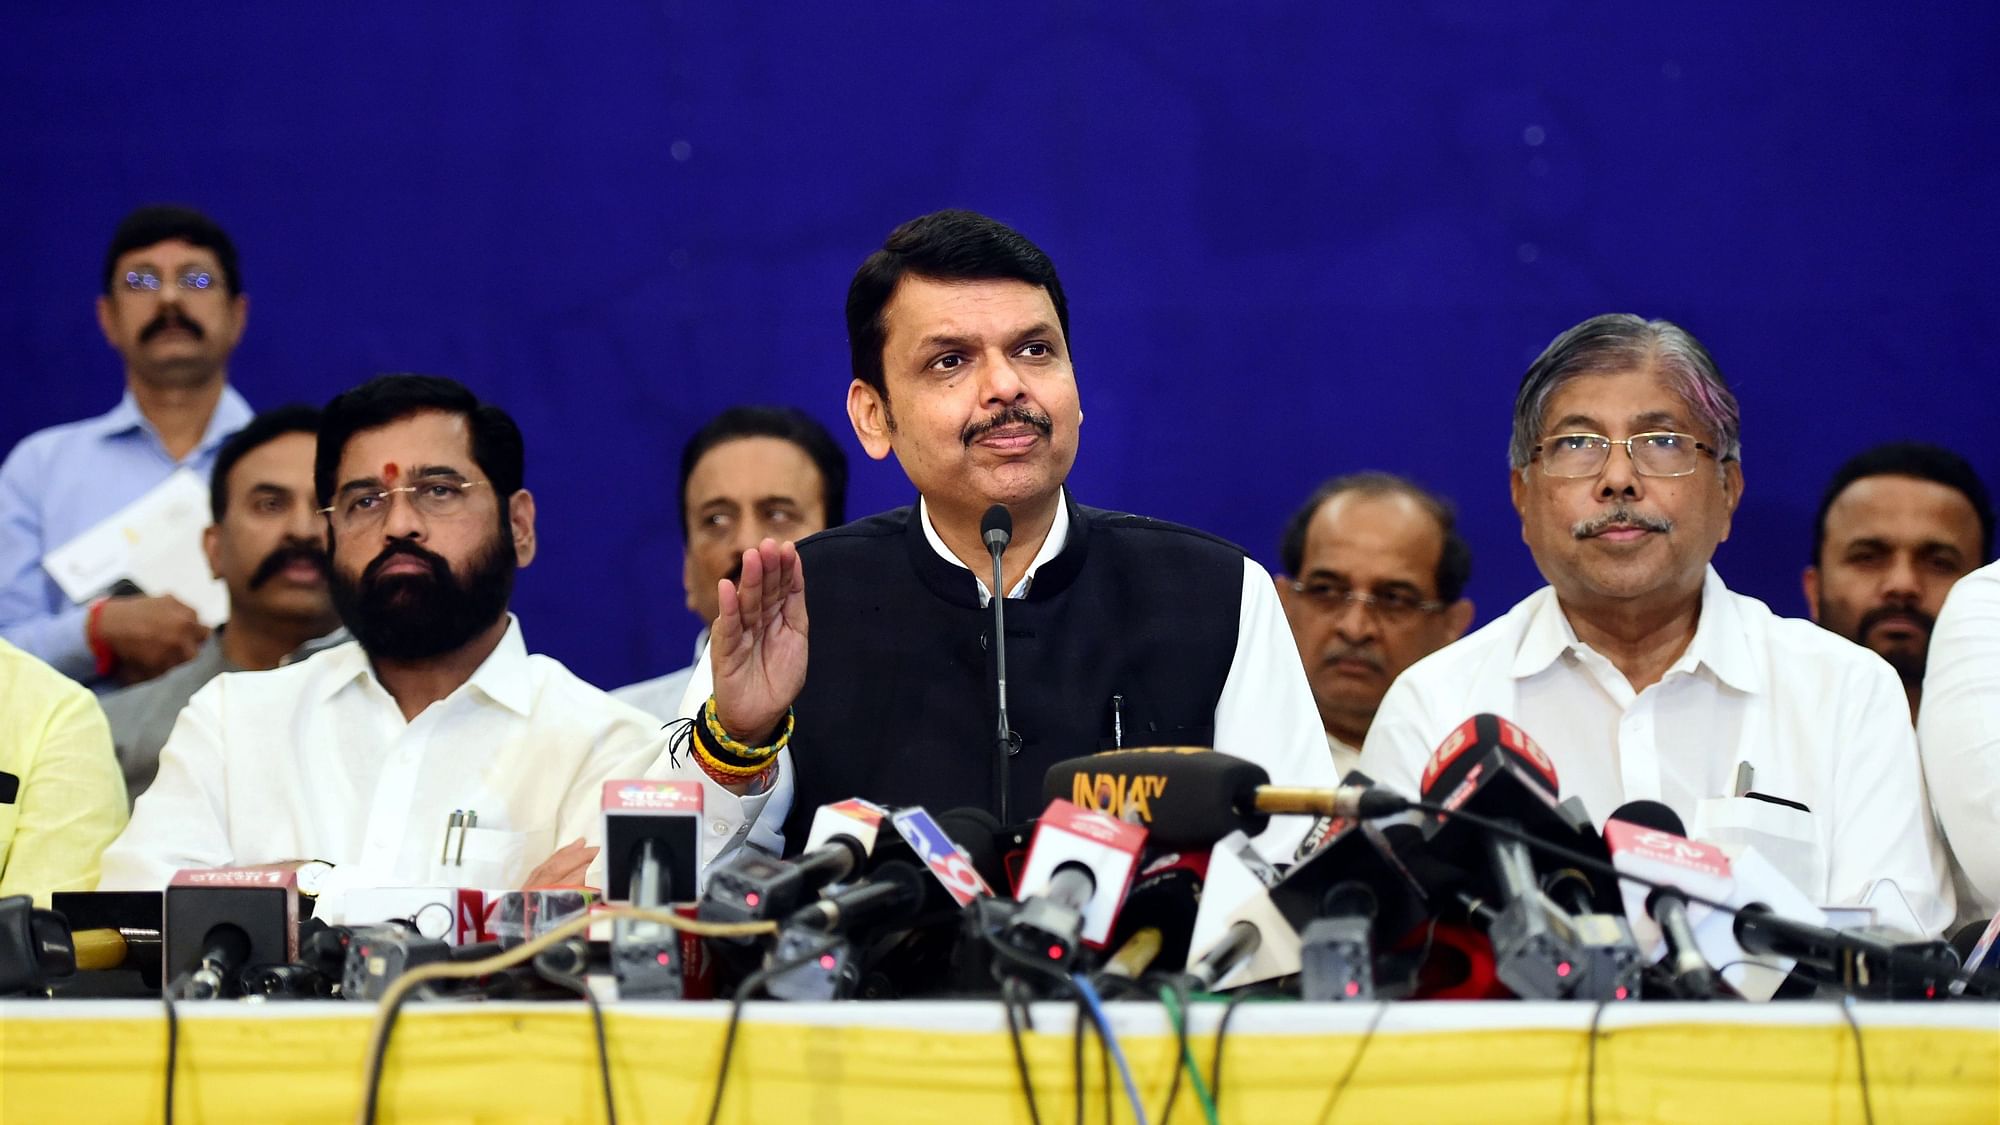 <div class="paragraphs"><p>The BJP's central leadership decided that Fadnavis should be a part of the Maharashtra government, party chief JP Nadda said, requesting Fadnavis for the same in his personal capacity.</p></div>